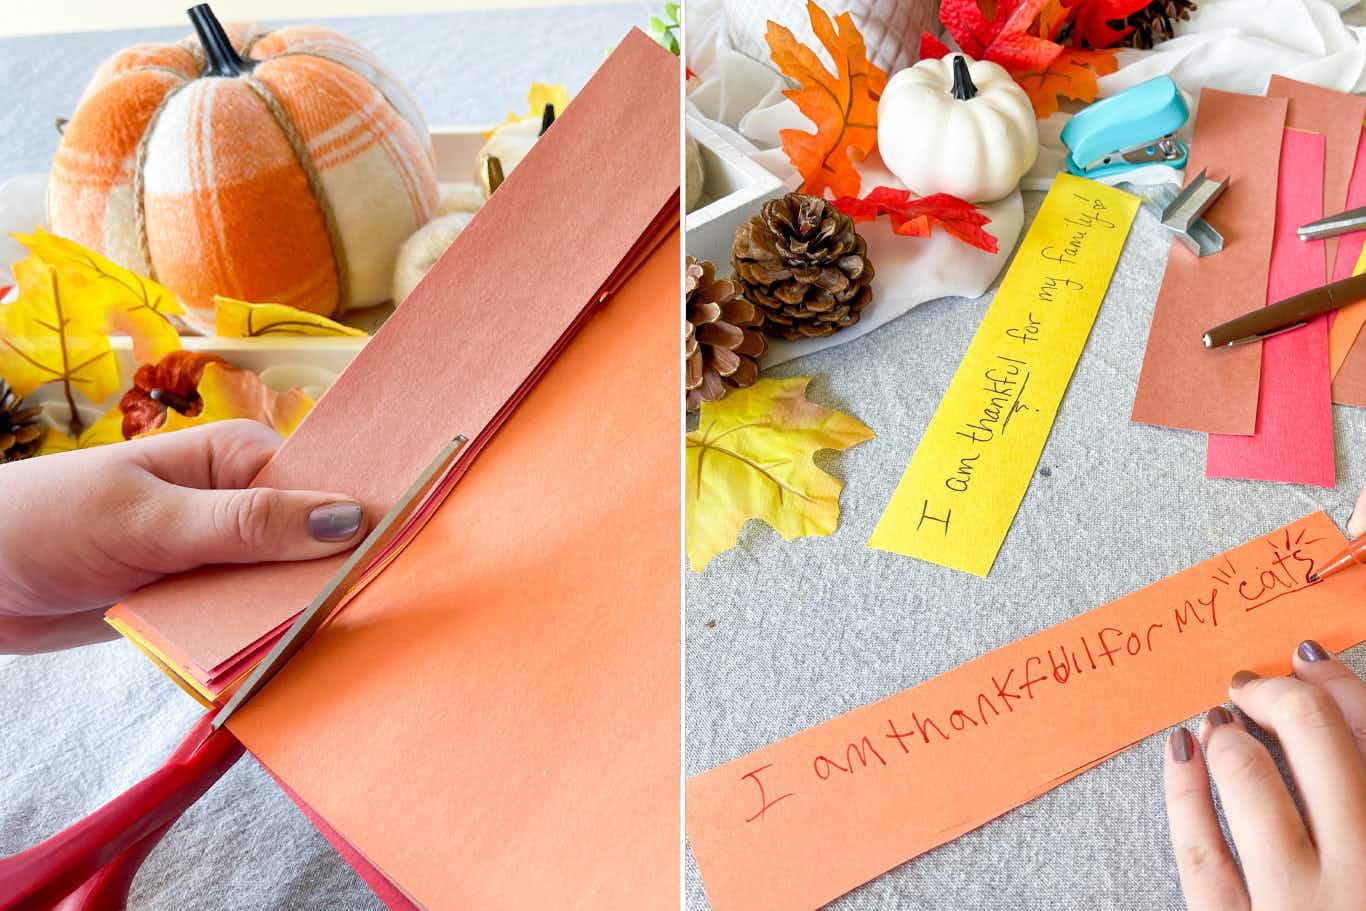 two images of a person cutting construction paper and writing on strips of the paper